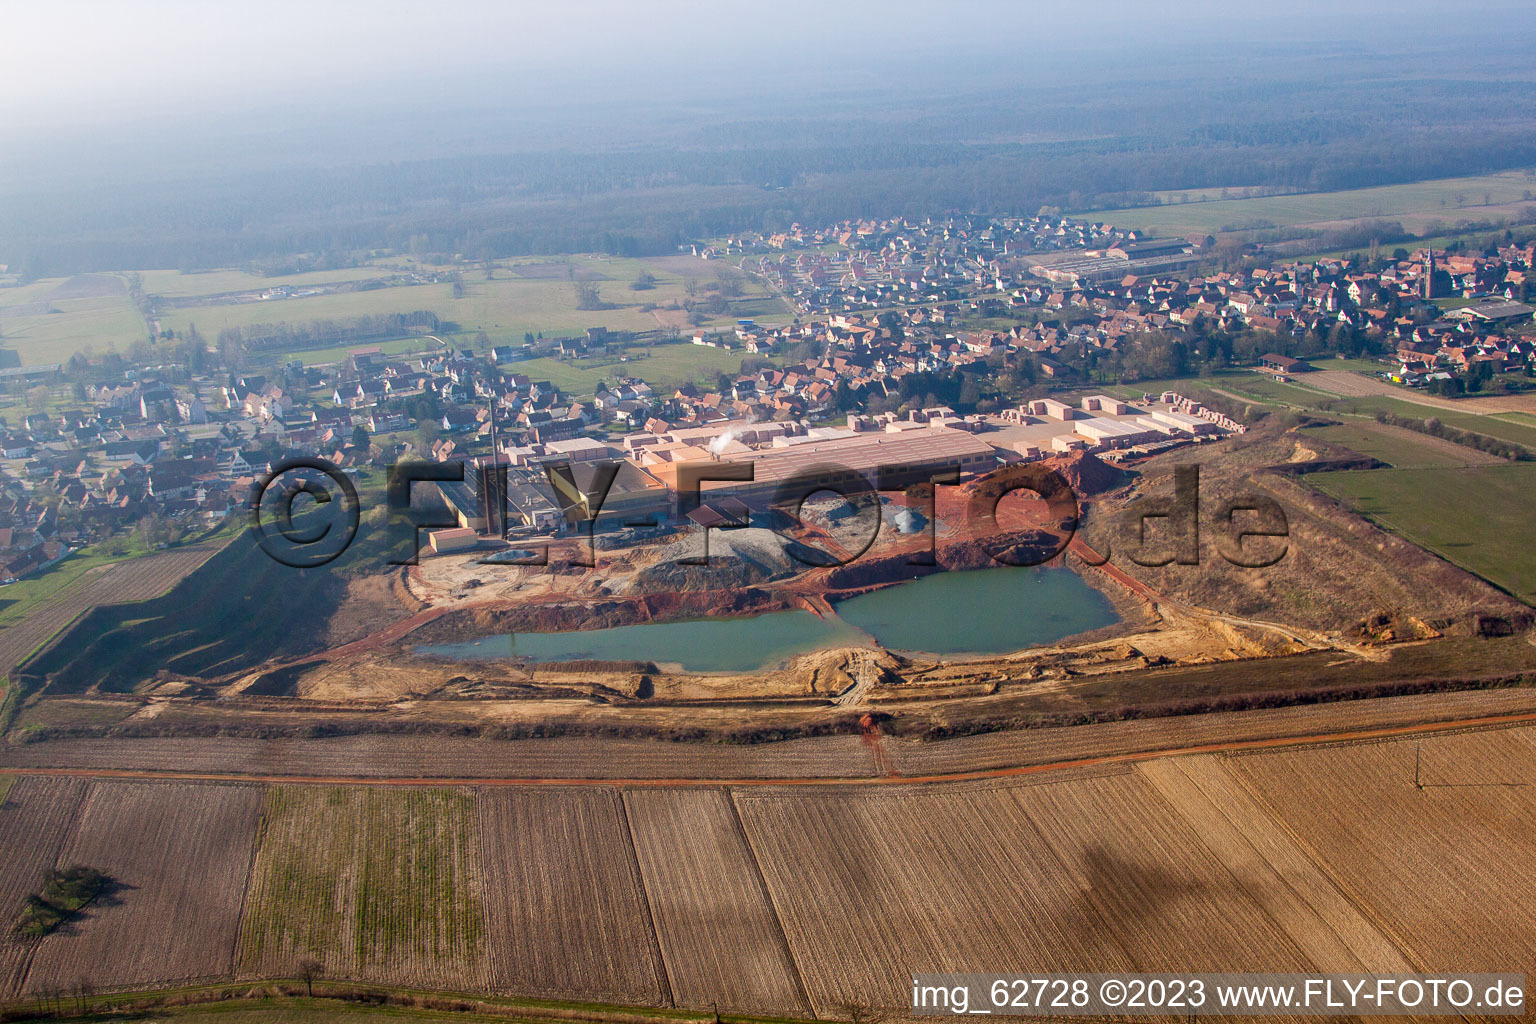 Kuhlendorf in the state Bas-Rhin, France from above